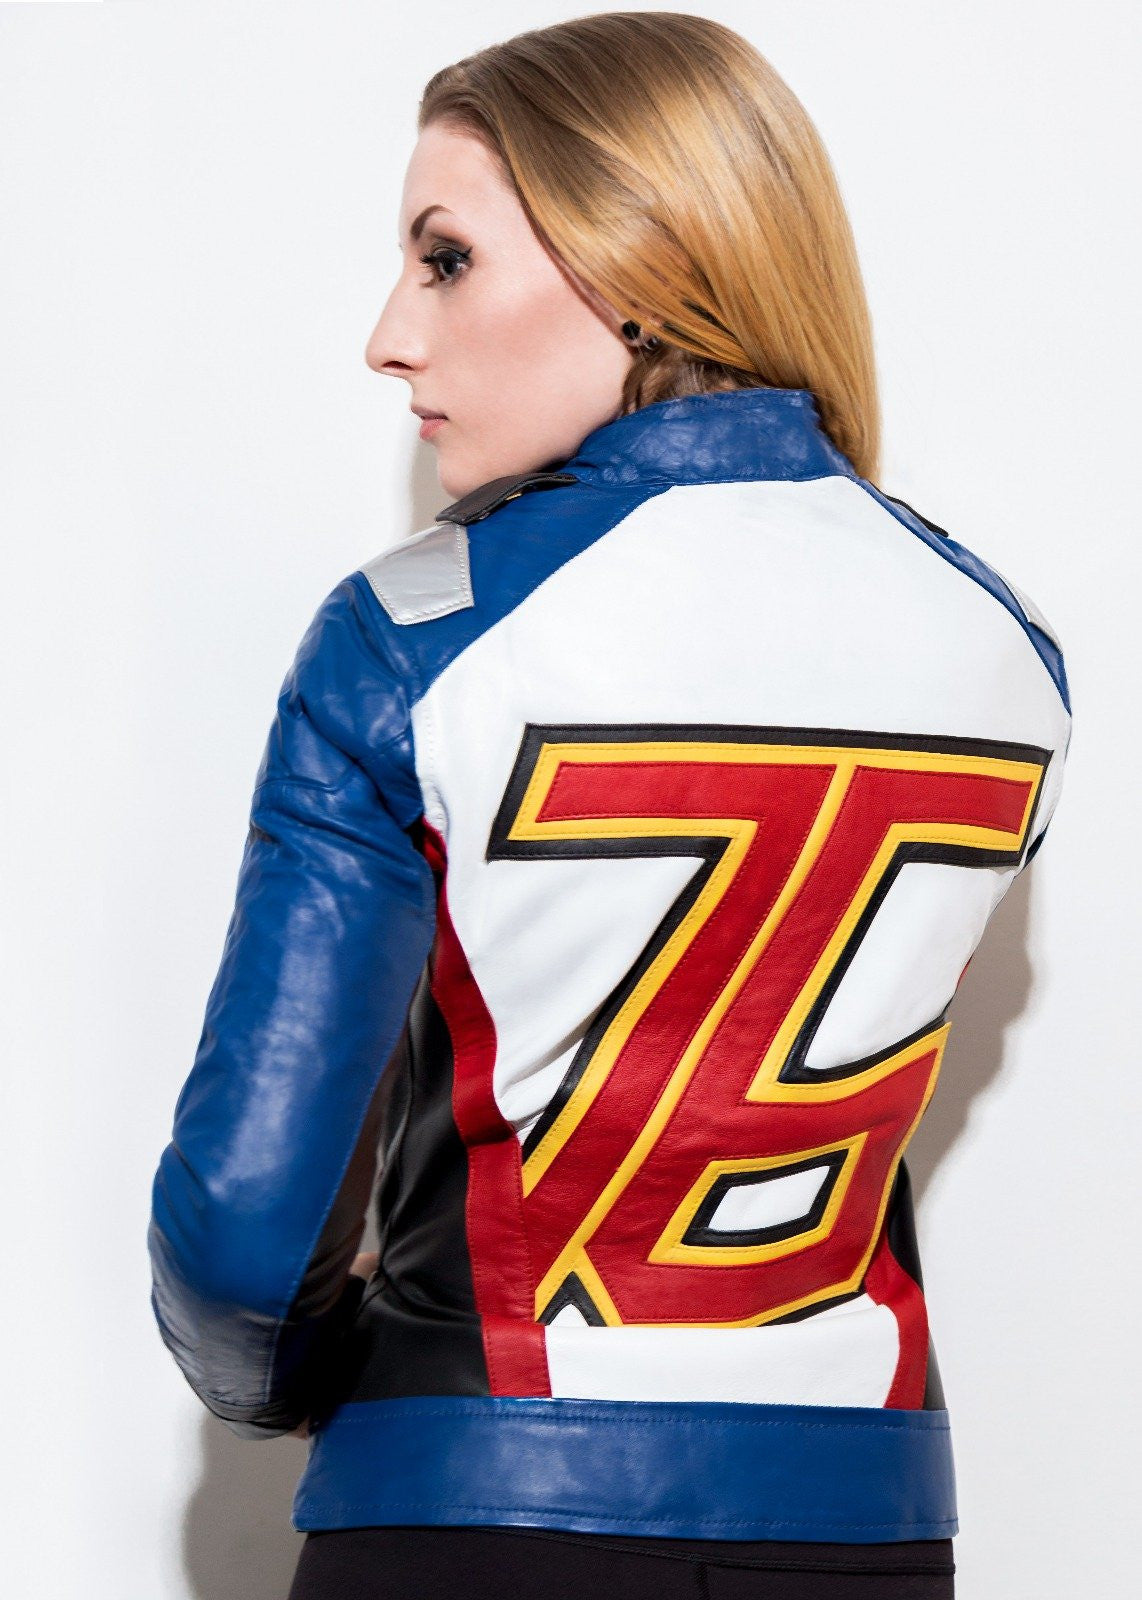 Women Soldier 76 Leather Jacket Blue Overwatch Cosplay Motocross Outerwear Luca Designs